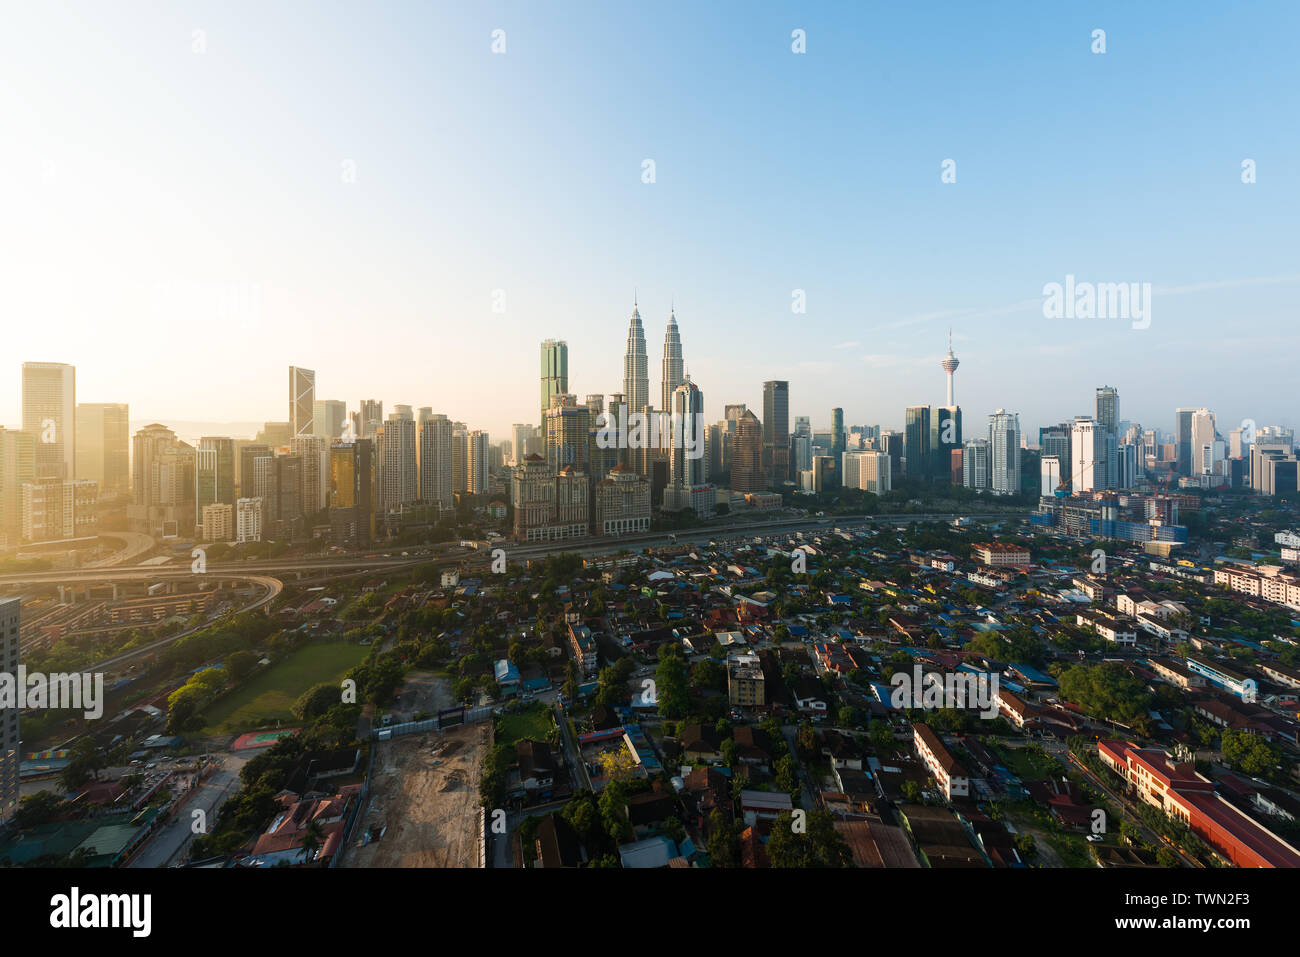 Kuala Lumpur city skyline and skyscrapers building at business district downtown in Kuala Lumpur, Malaysia. Asia. Stock Photo